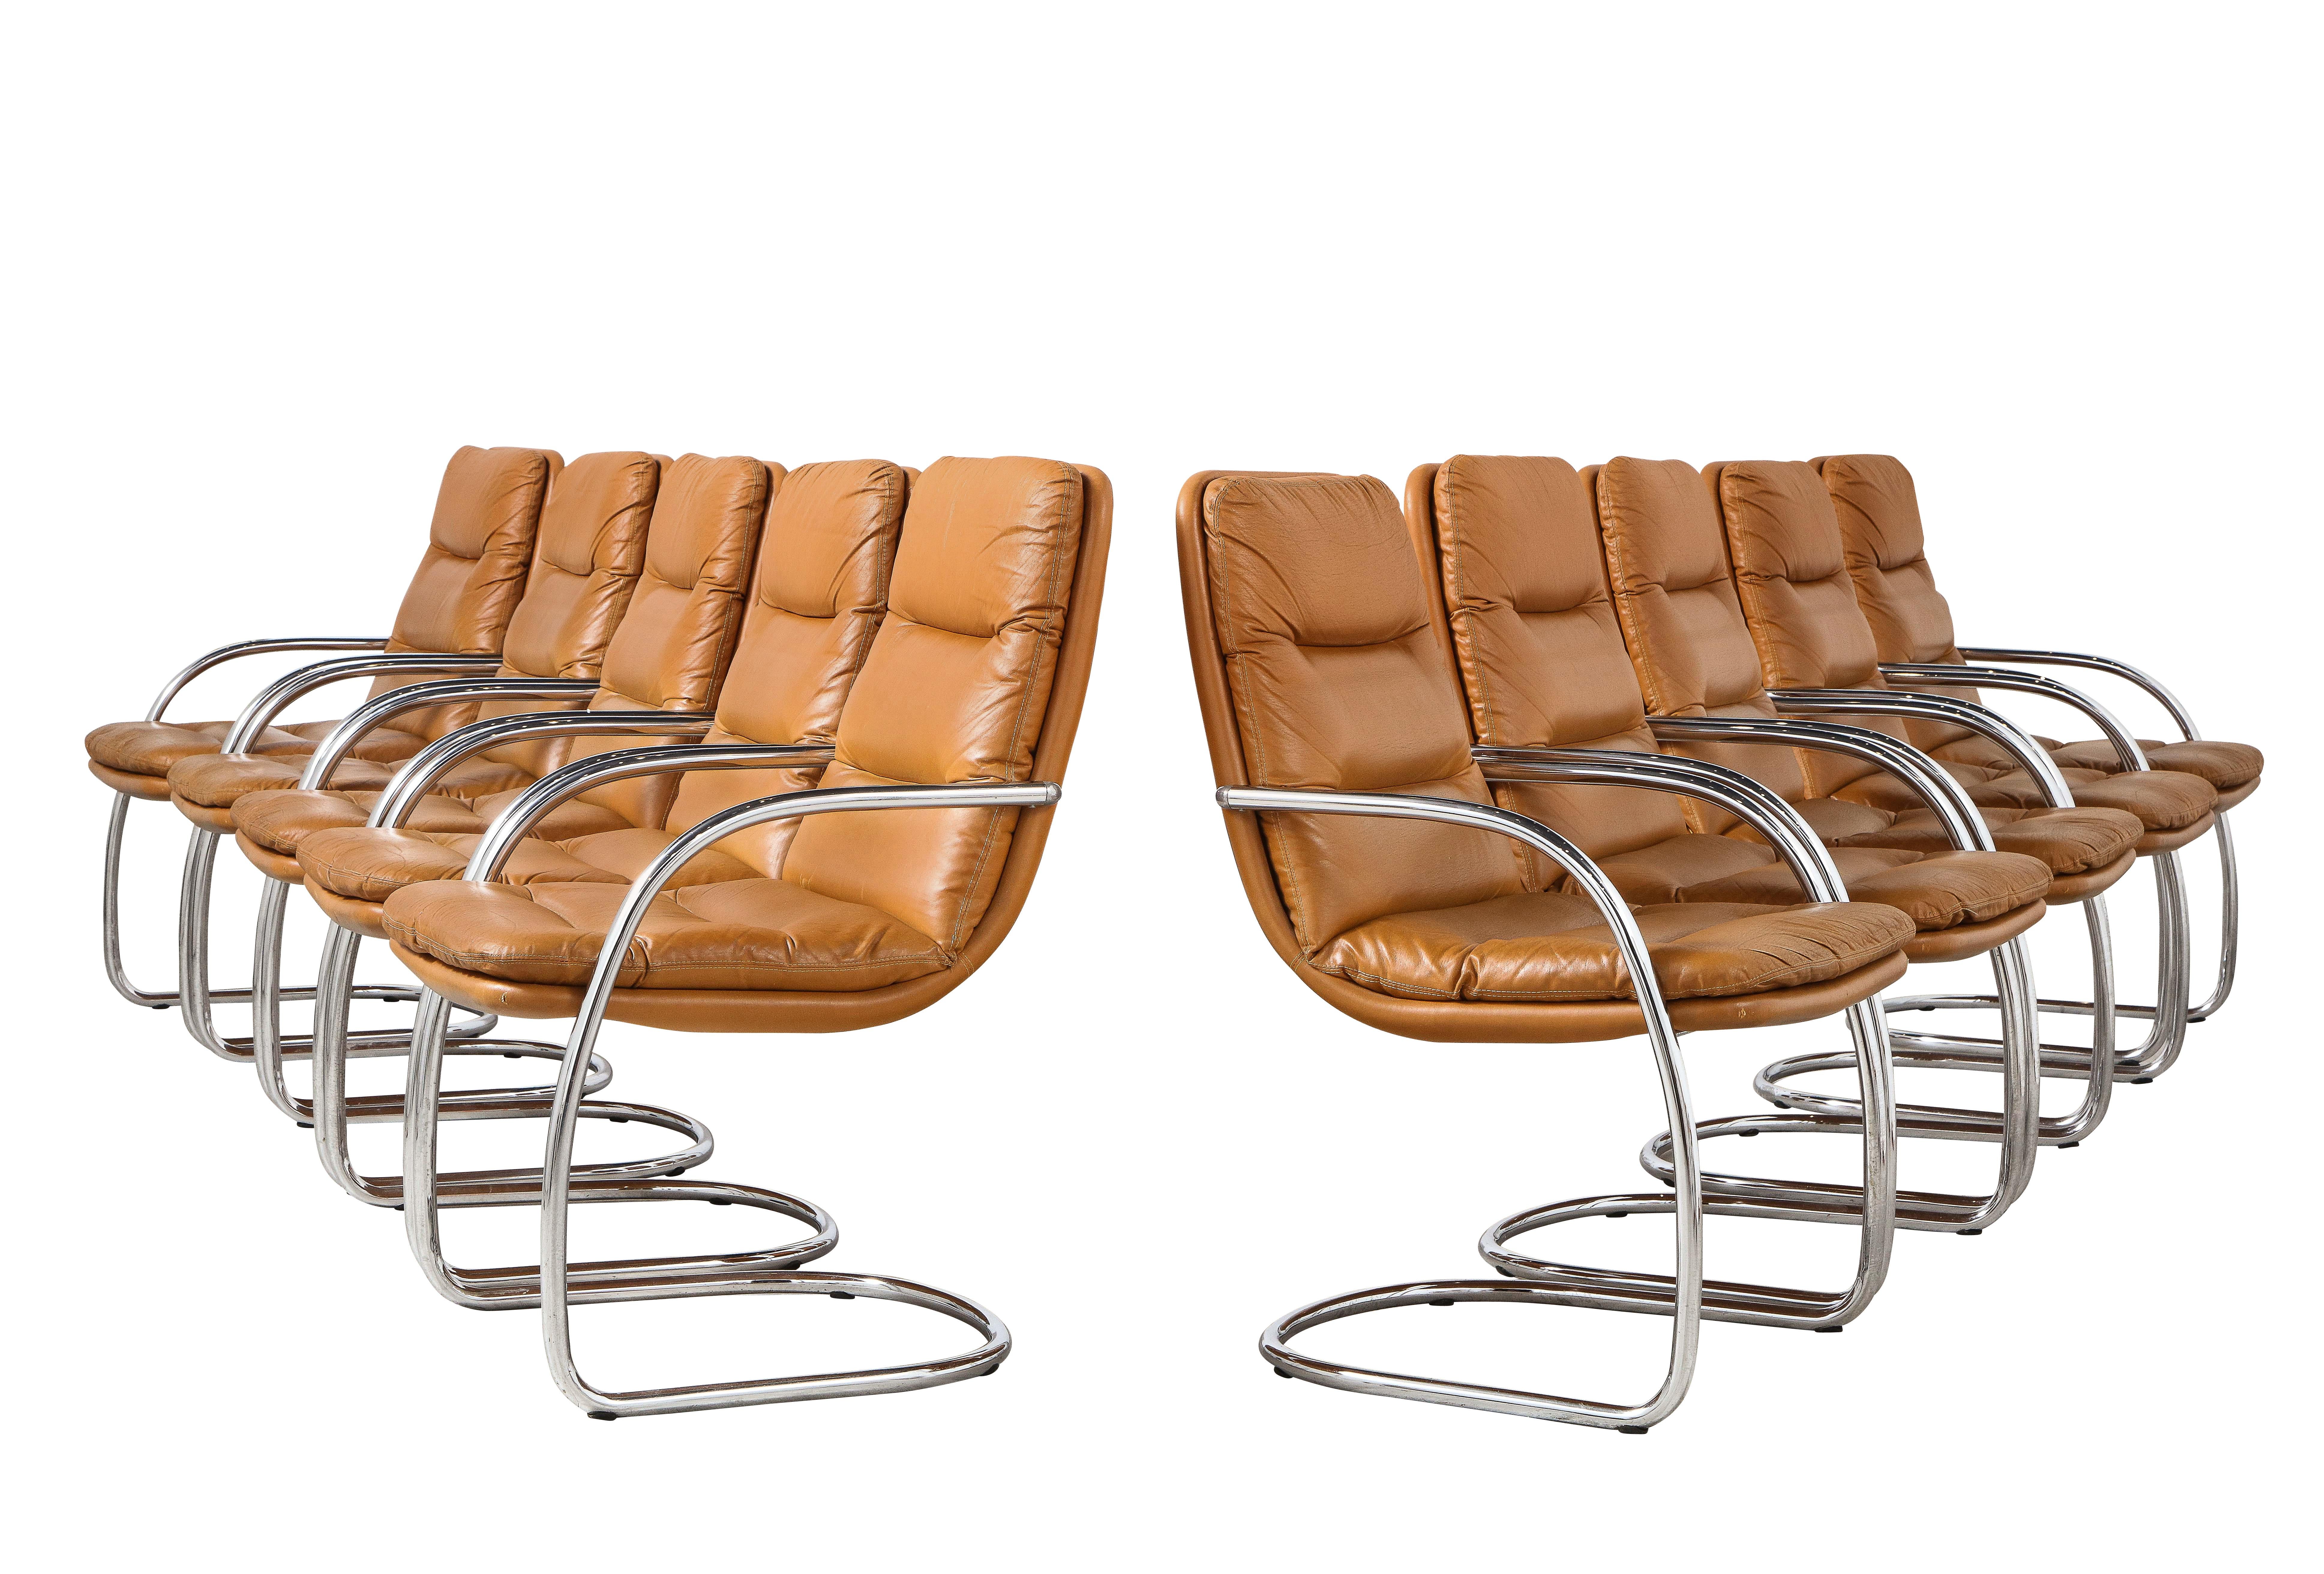 Late 20th Century Set of Ten Italian Leather and Chrome Armchairs For Sale